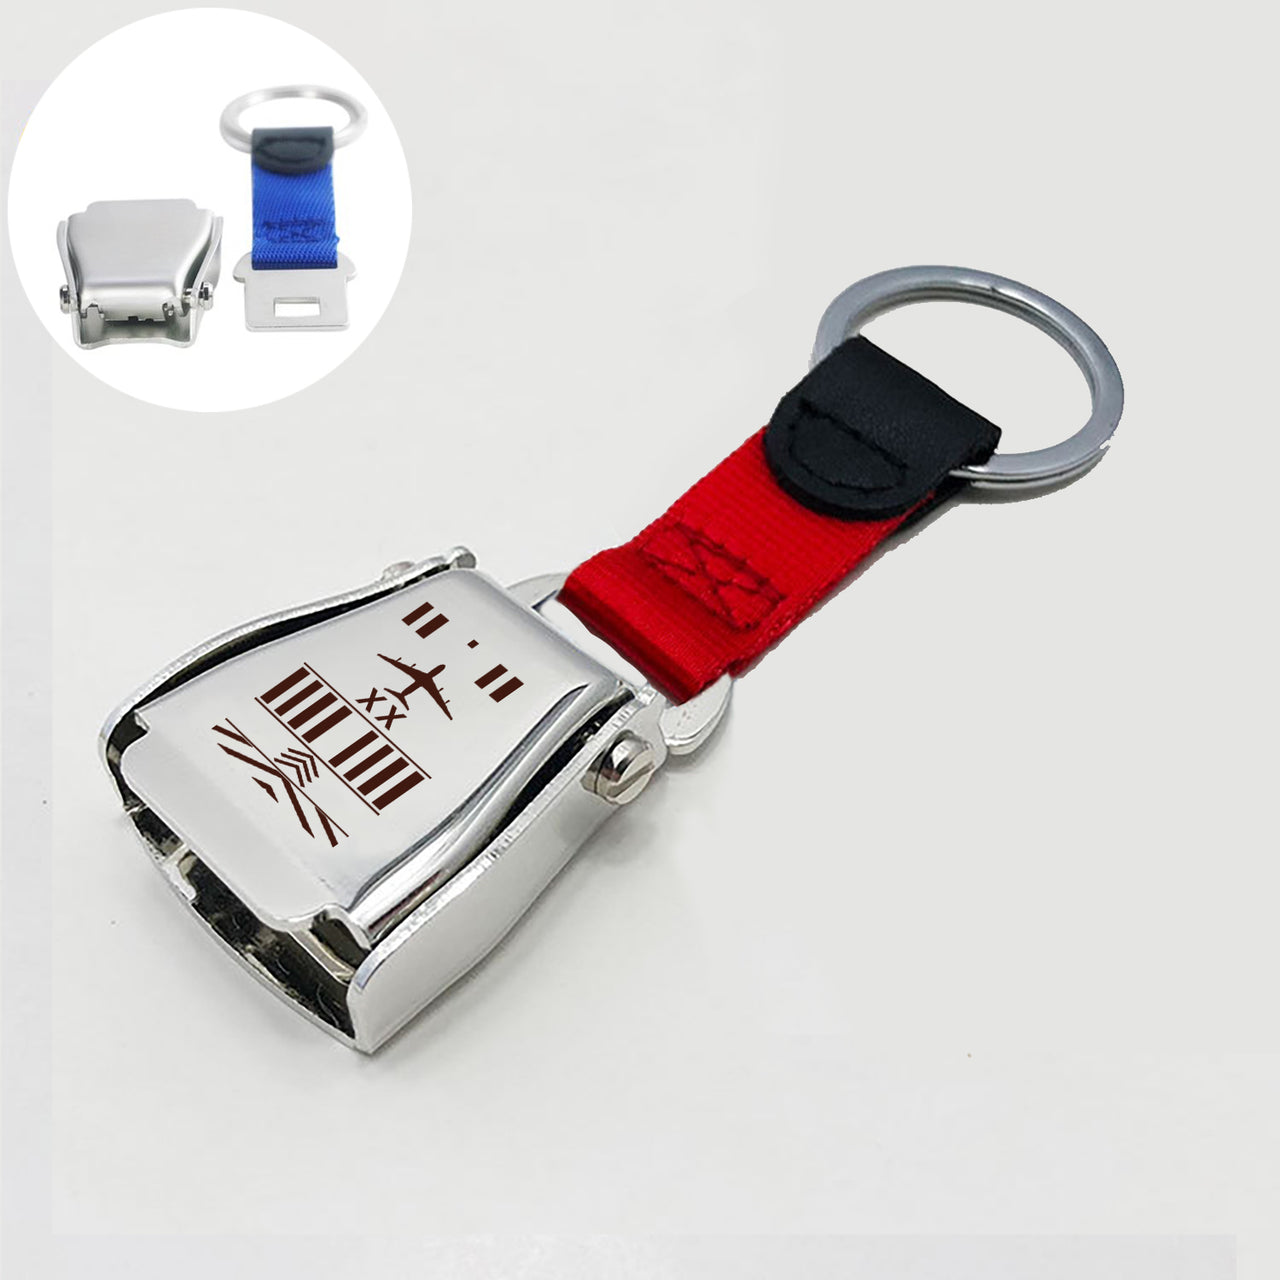 Products Runway (Customizable) Designed Airplane Seat Belt Key Chains